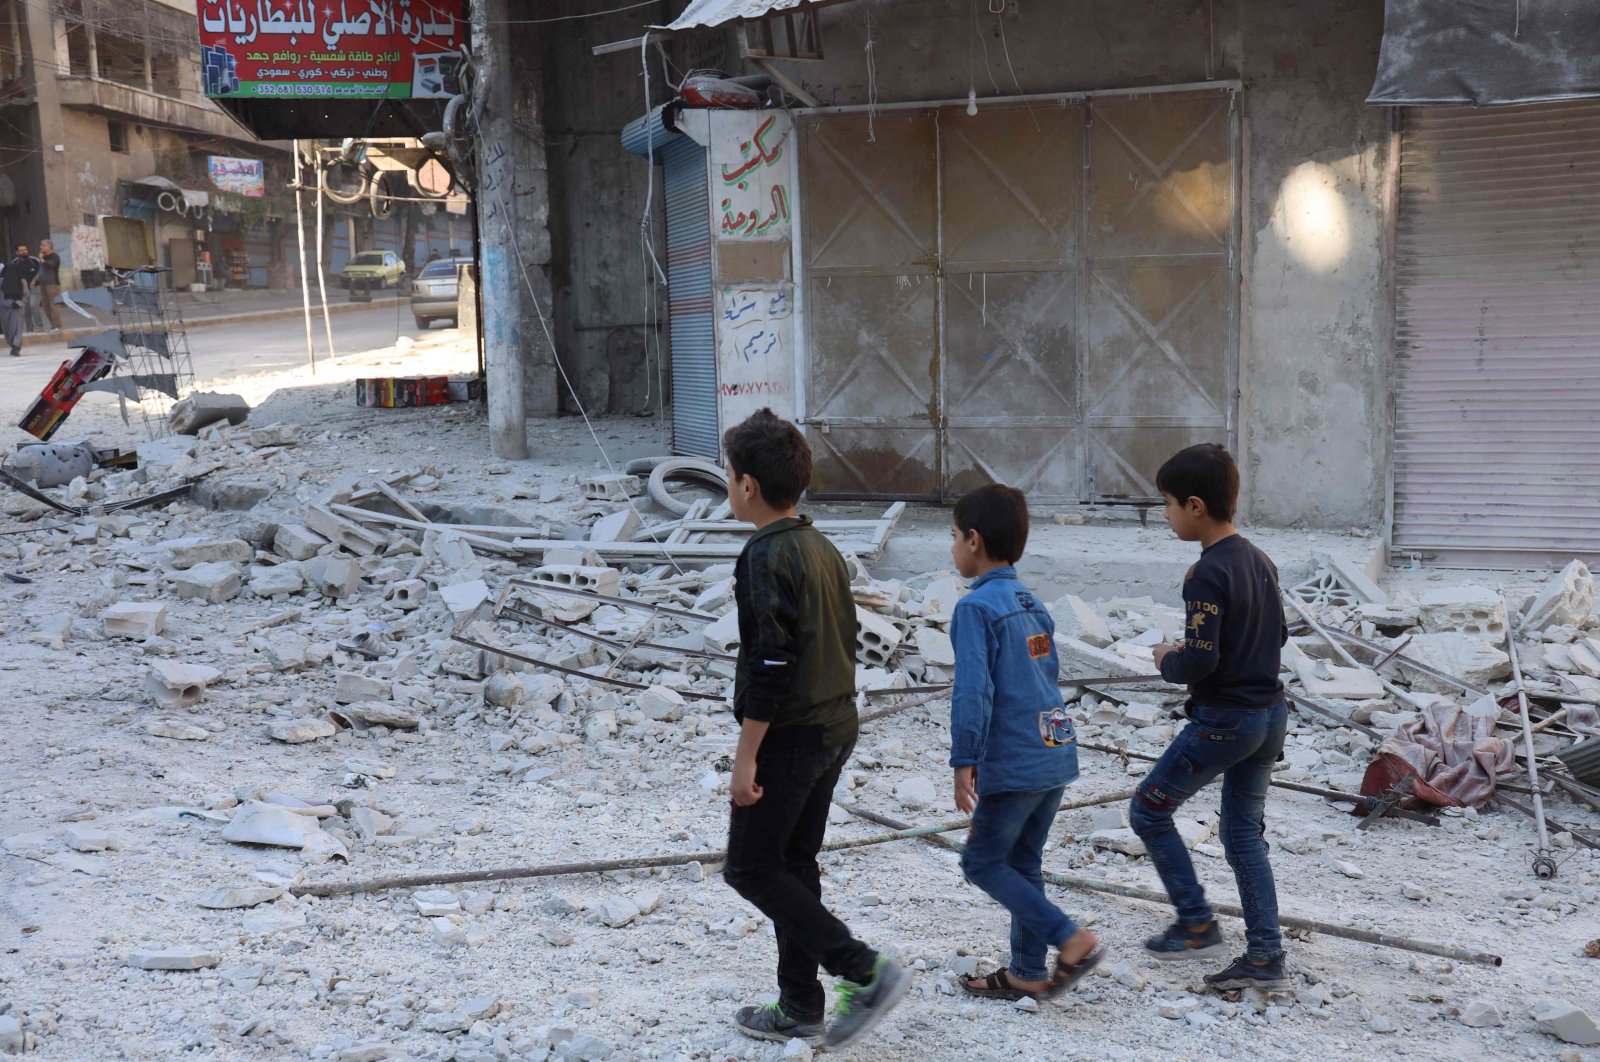 People walk past debris at the site of shelling in the Syrian town of Ariha in the opposition-held northwestern Syrian Idlib province on October 20, 2021. (AFP Photo)